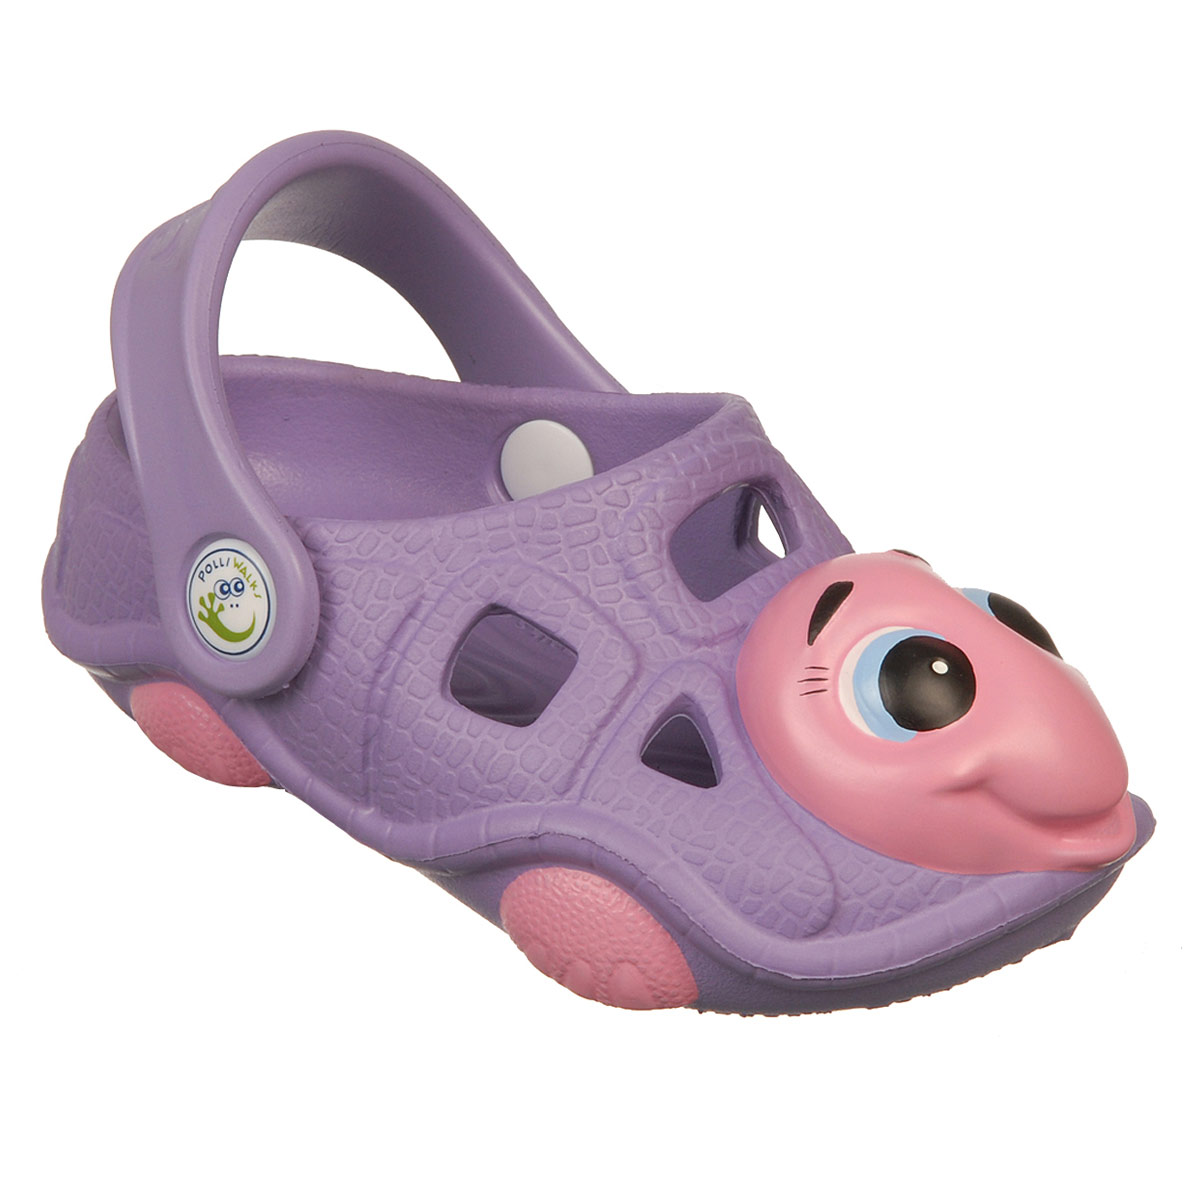 Polliwalks : Toddler shoes Tory  the Turtle  Purple # 11